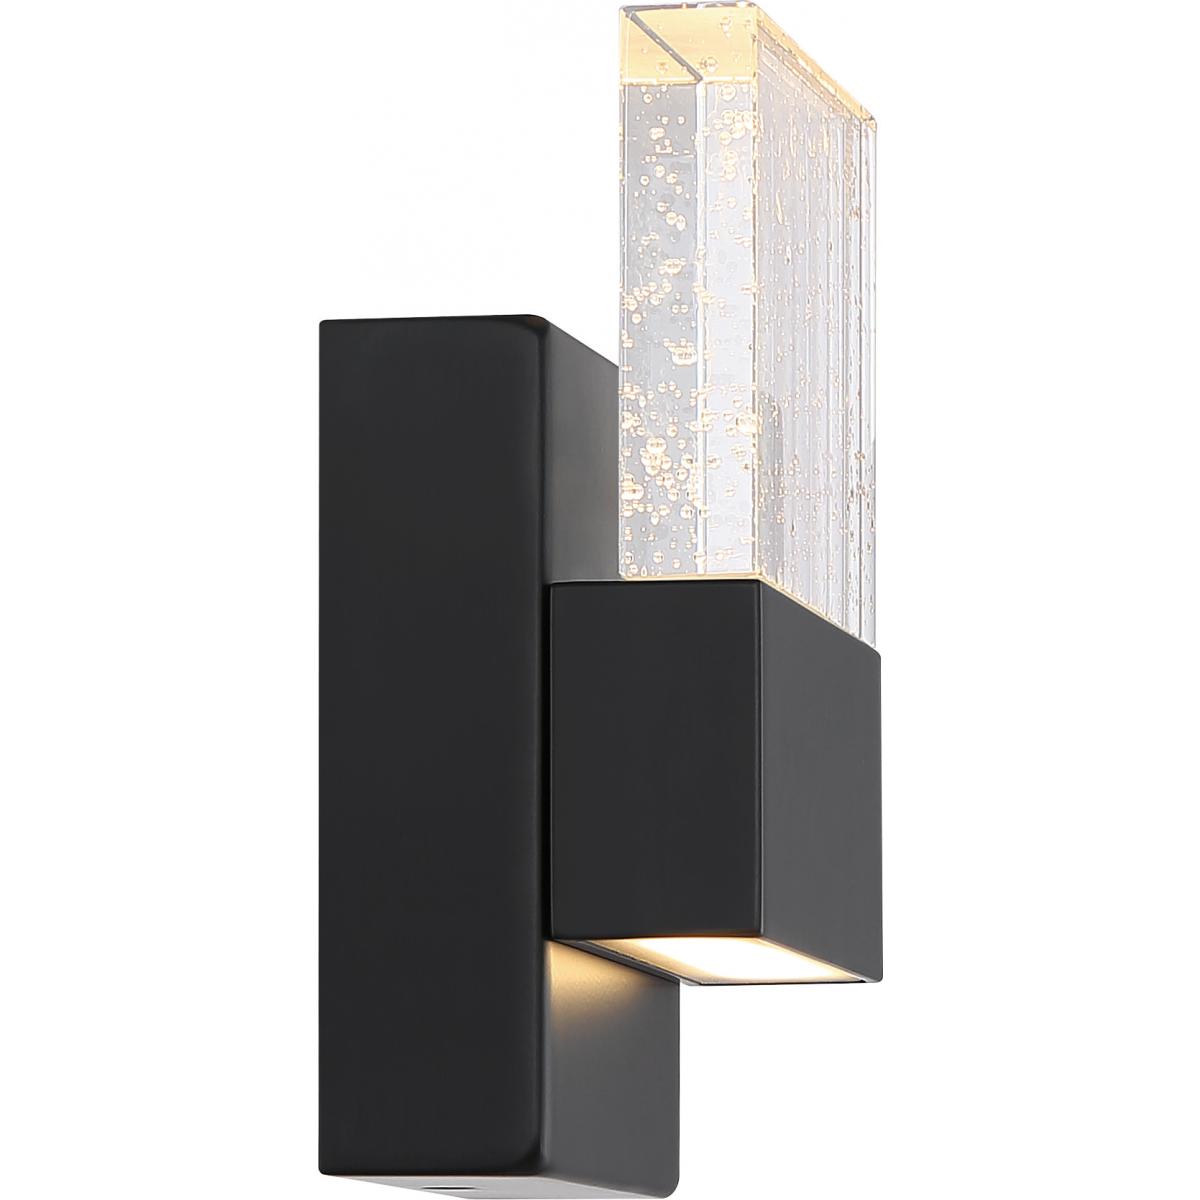 Satco 62-1511 Ellusion LED Small Wall Sconce 15W Matte Black Finish with Seeded Glass